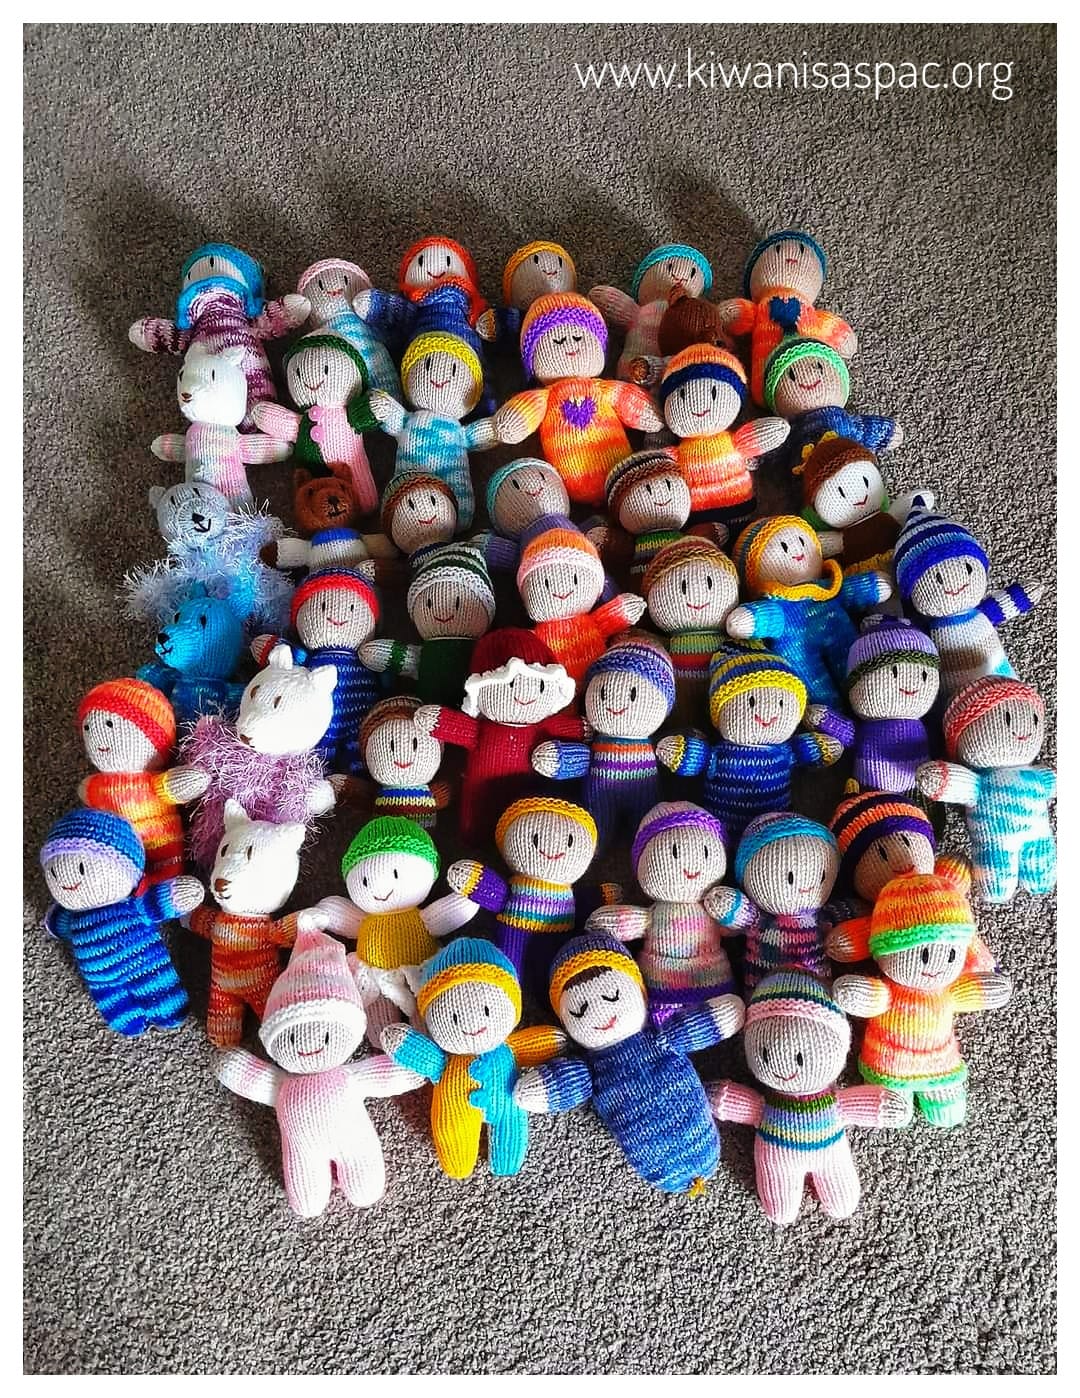 Threads of Compassion: Kiwanis Knitted Dolls and Teddies for the Children of Vanuatu Island